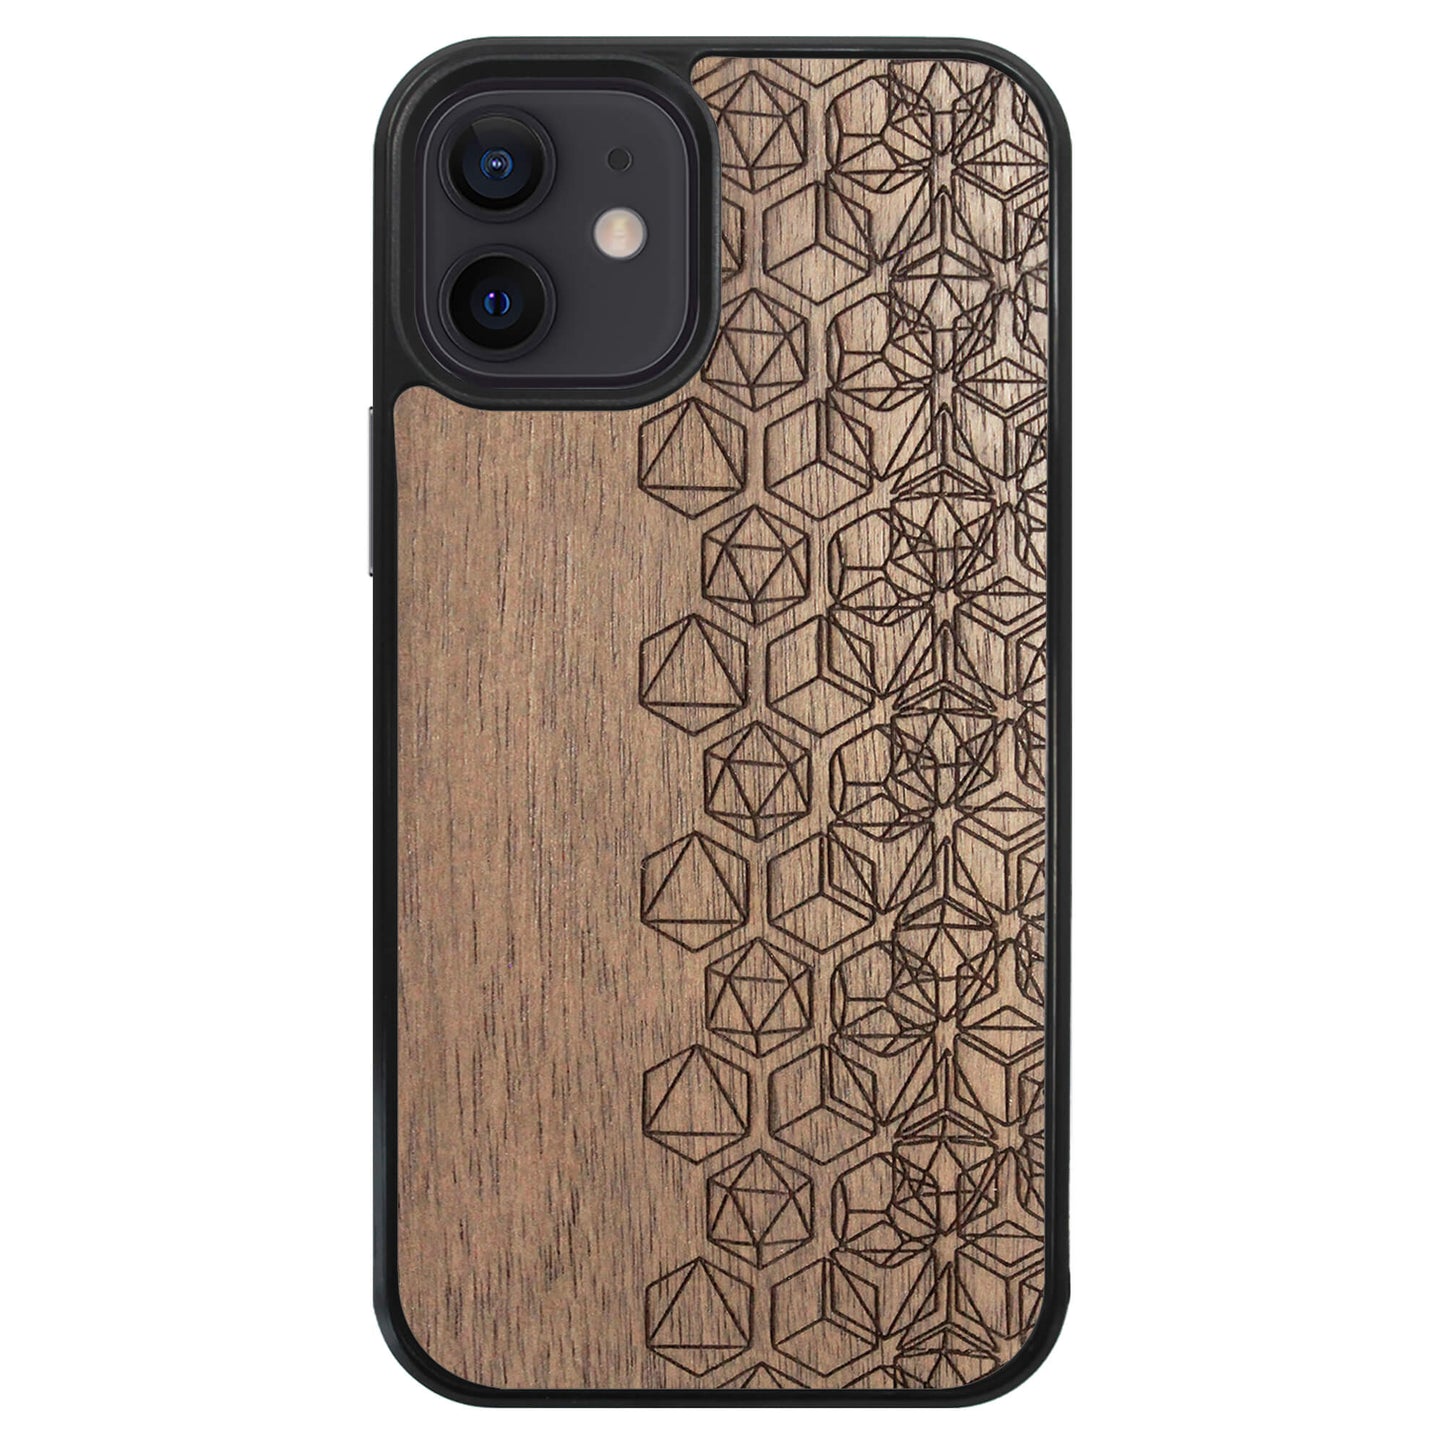 Wooden Case for iPhone 12 Mini Geometric